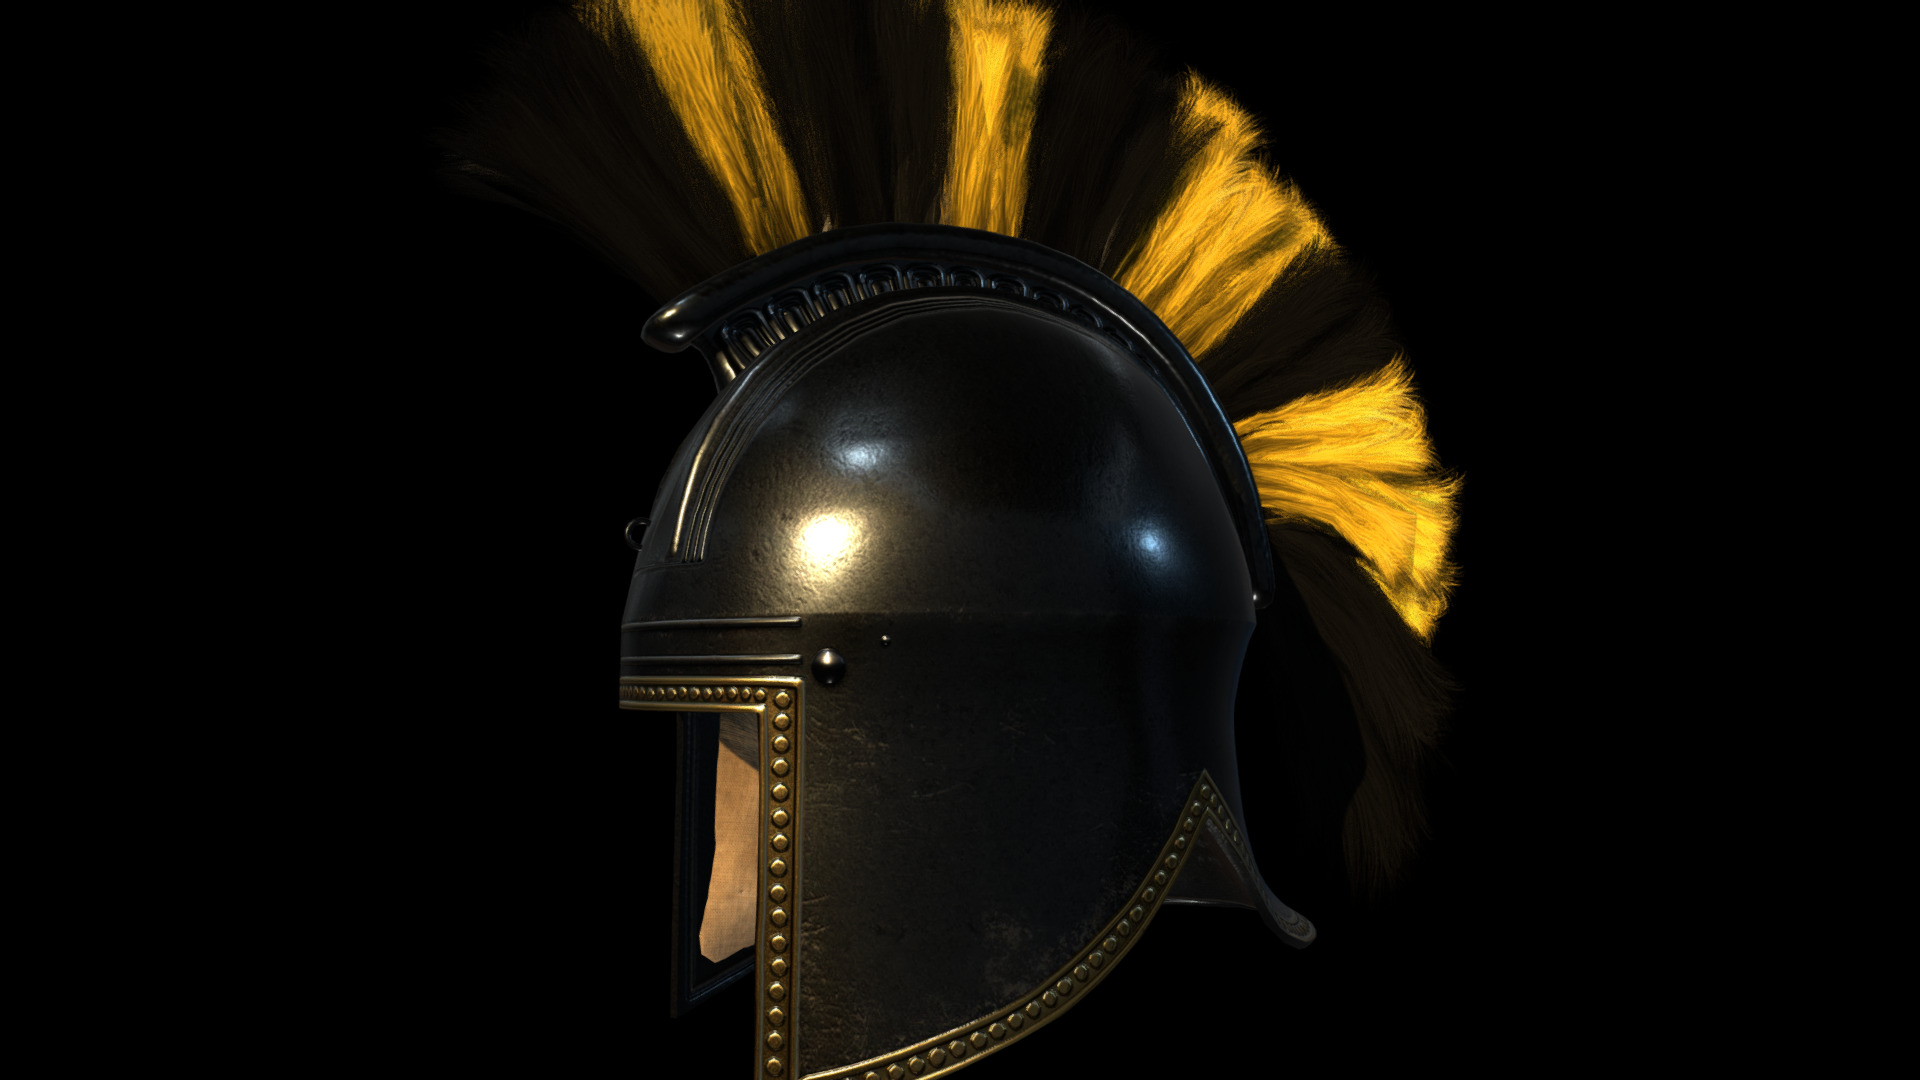 3D model Illyrian Helmet #2 - This is a 3D model of the Illyrian Helmet #2. The 3D model is about a close-up of a camera.